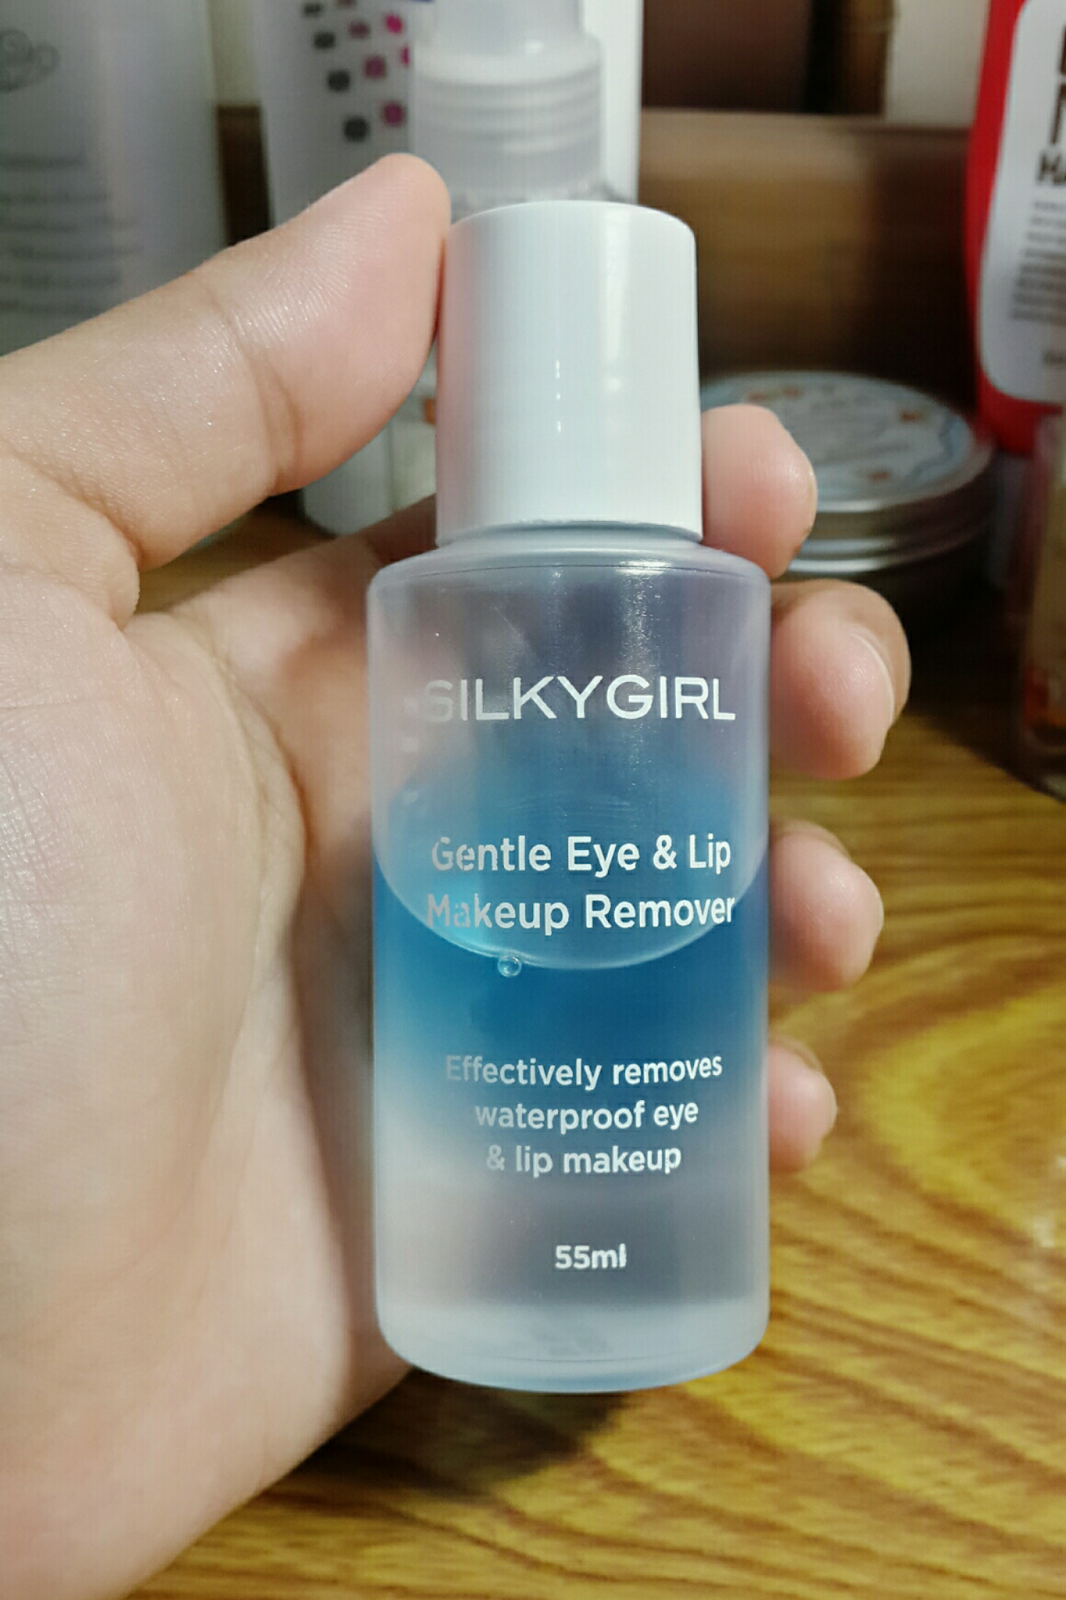 Review SILKYGIRL Gentle Eye & Lip Makeup Remover - Makeup Remover Paling Ampuh - oMerryView 